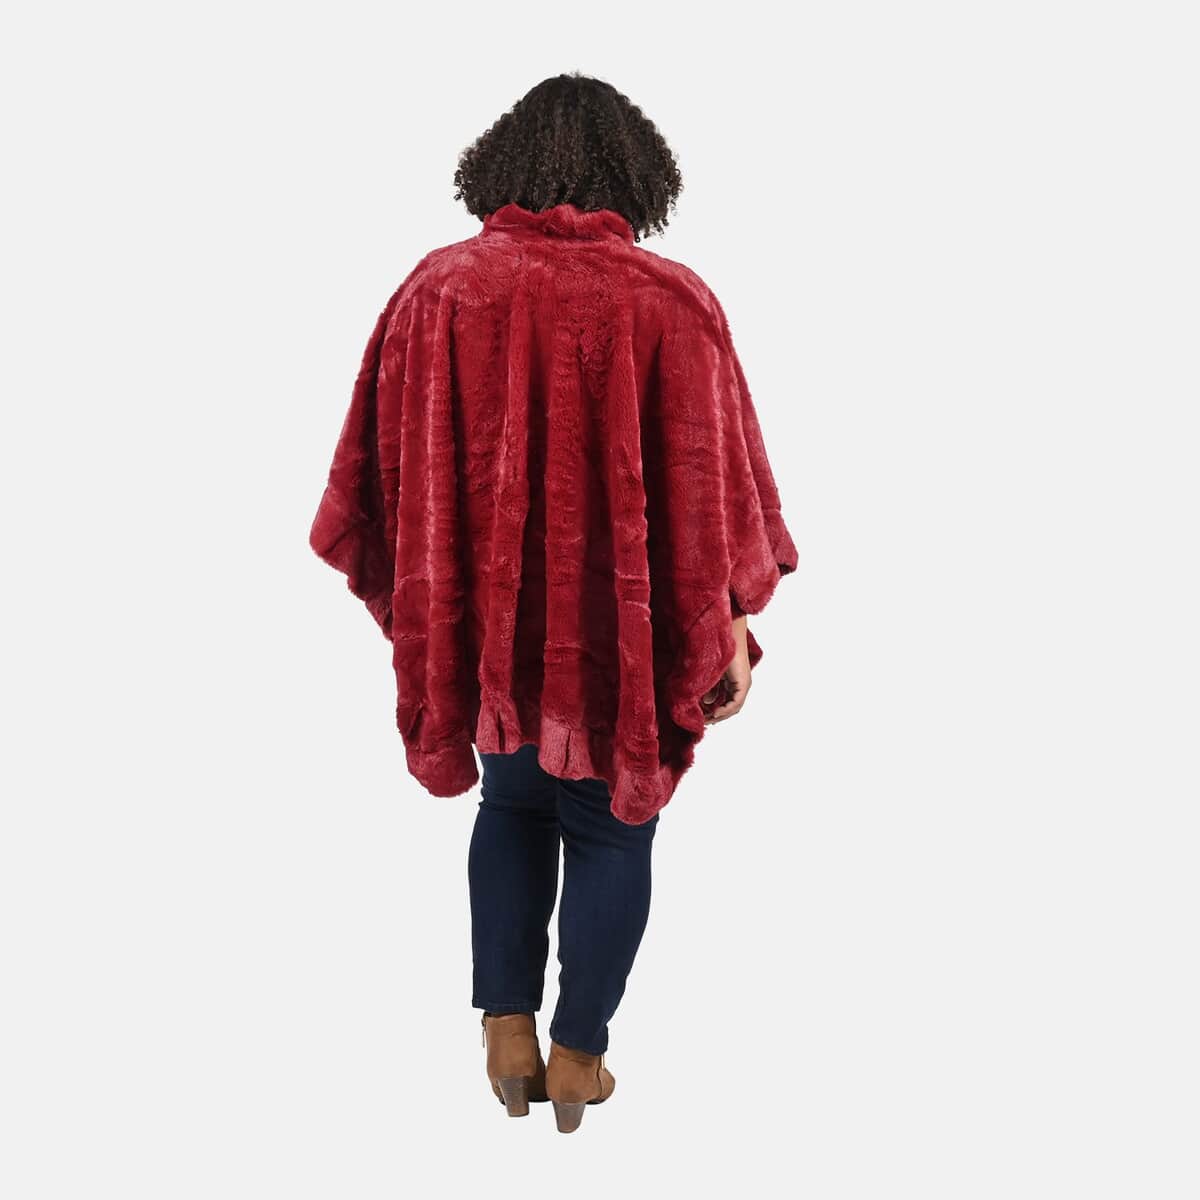 Tamsy Holiday Special Cranberry Faux Fur Ruana with Toggle Button - One Size Fits Most image number 1